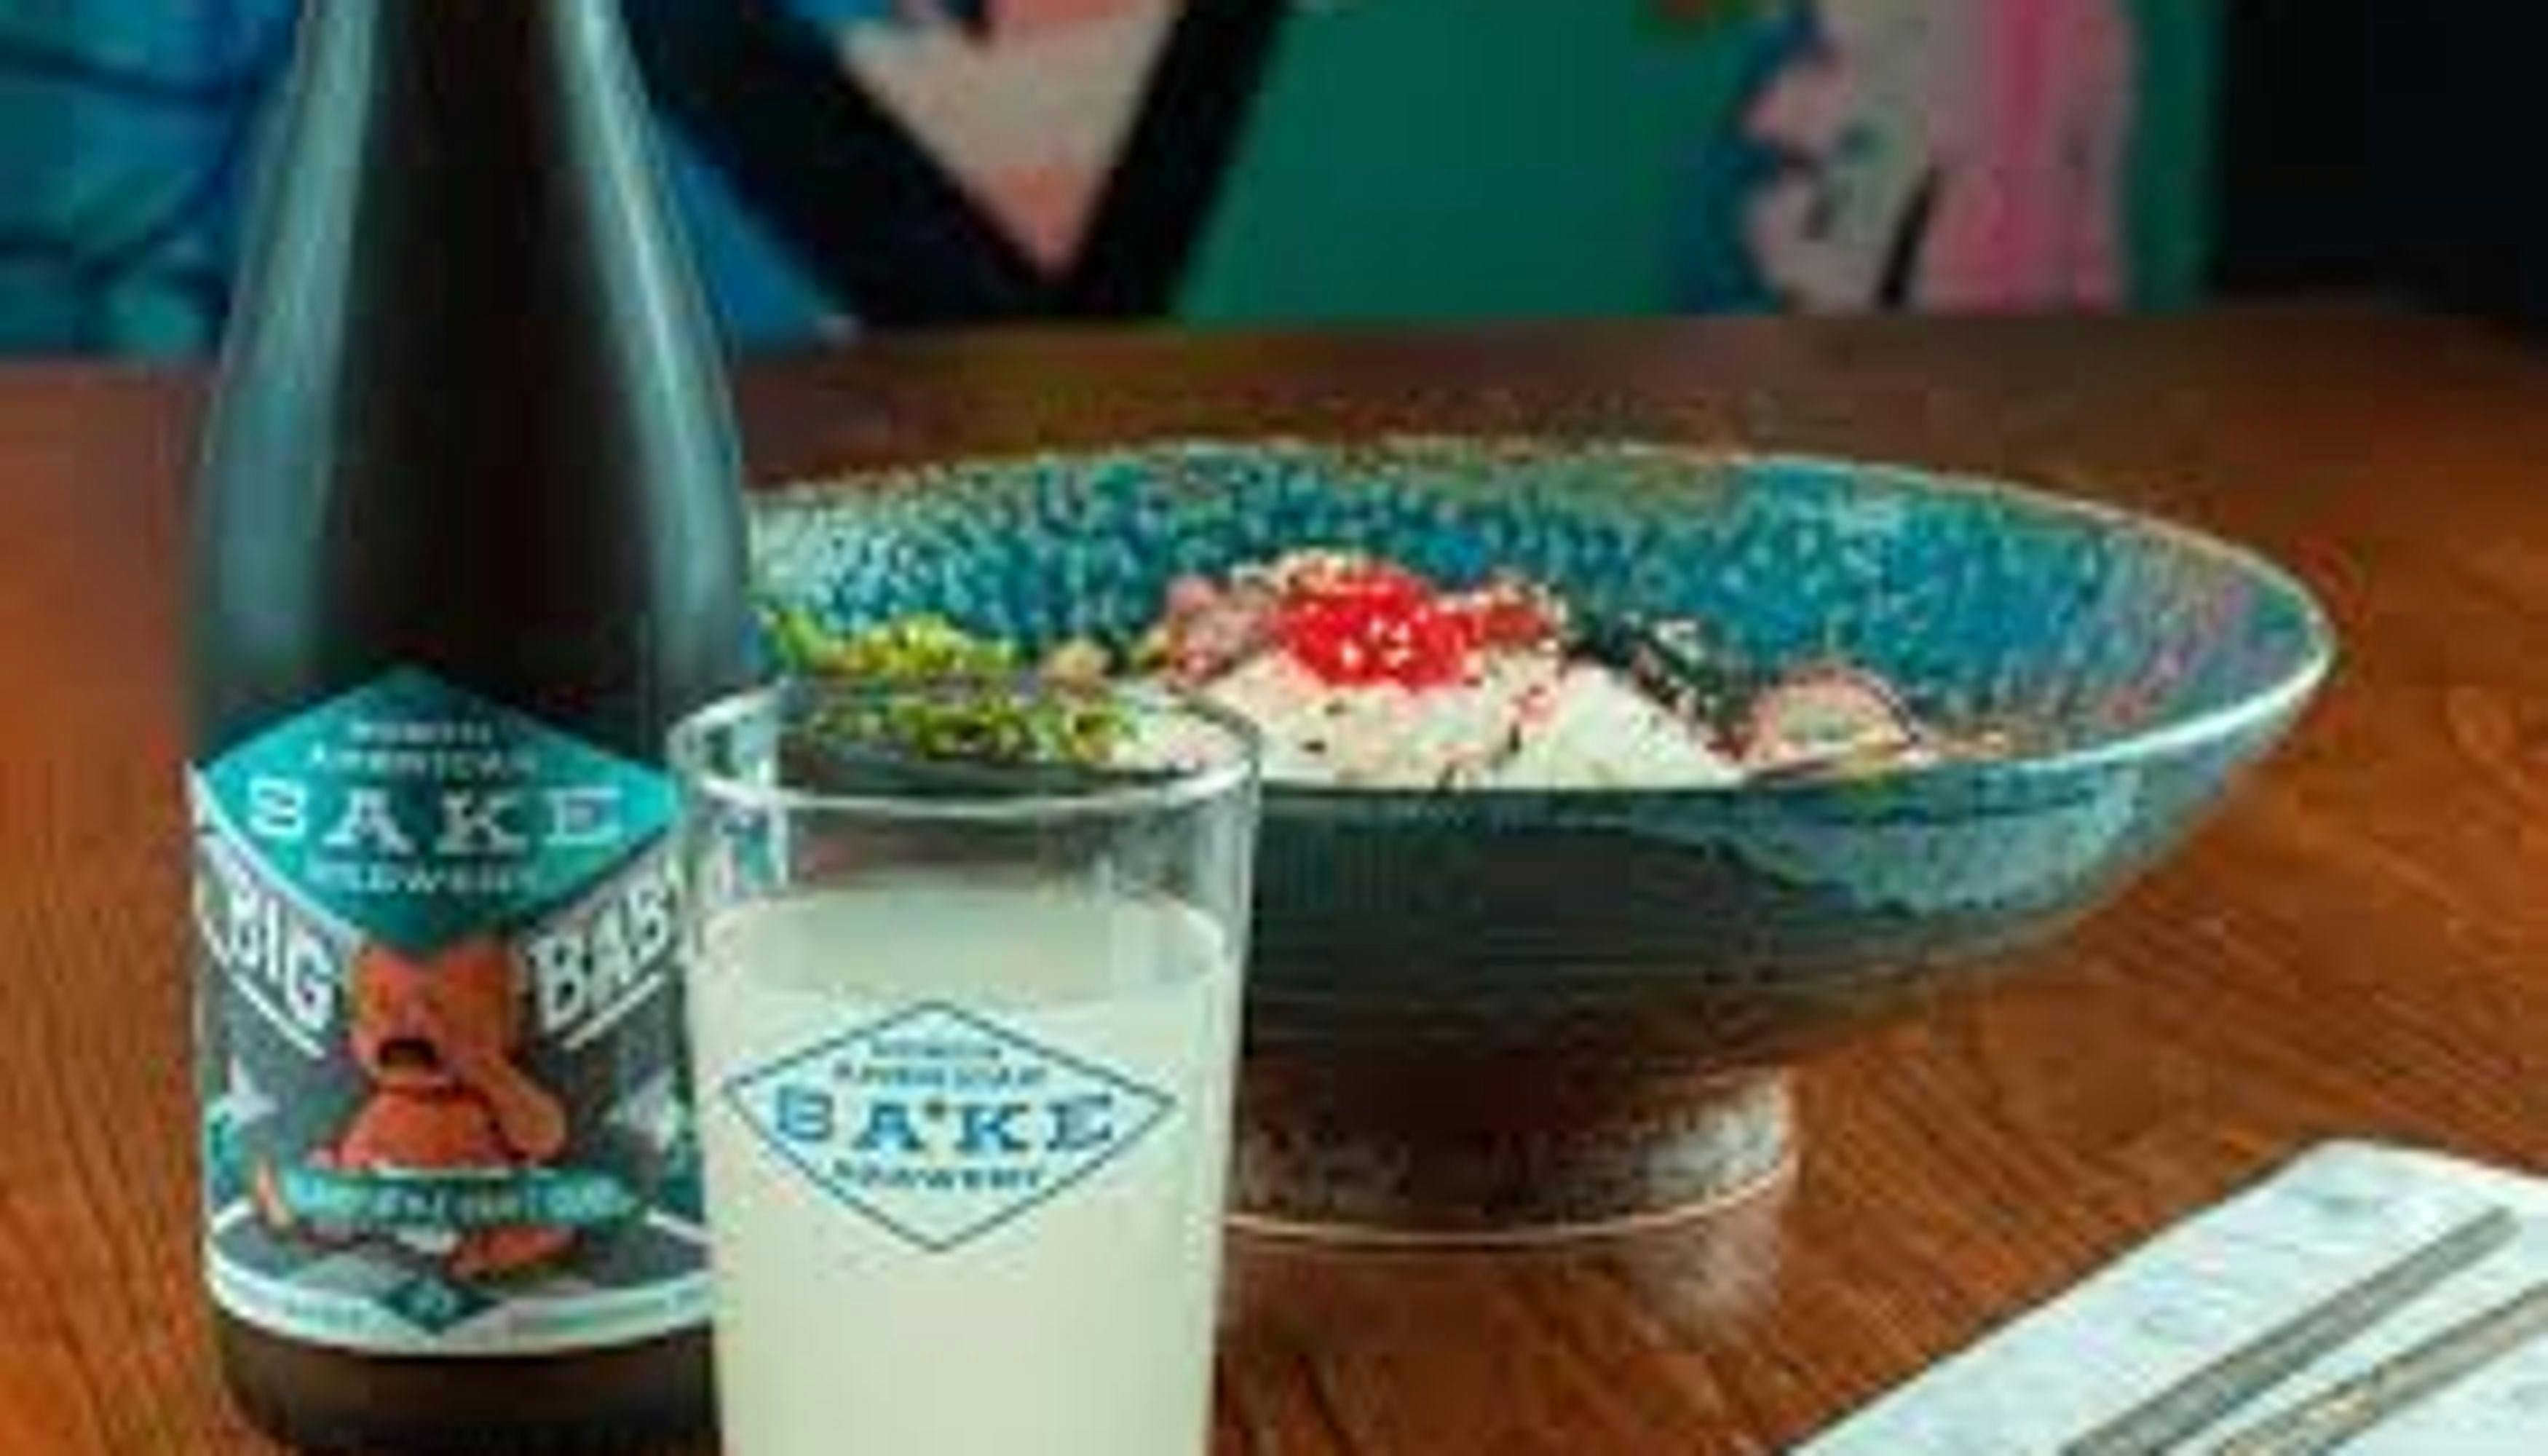 North American Sake paired with rice bowl from Bad Luck Ramen Bar